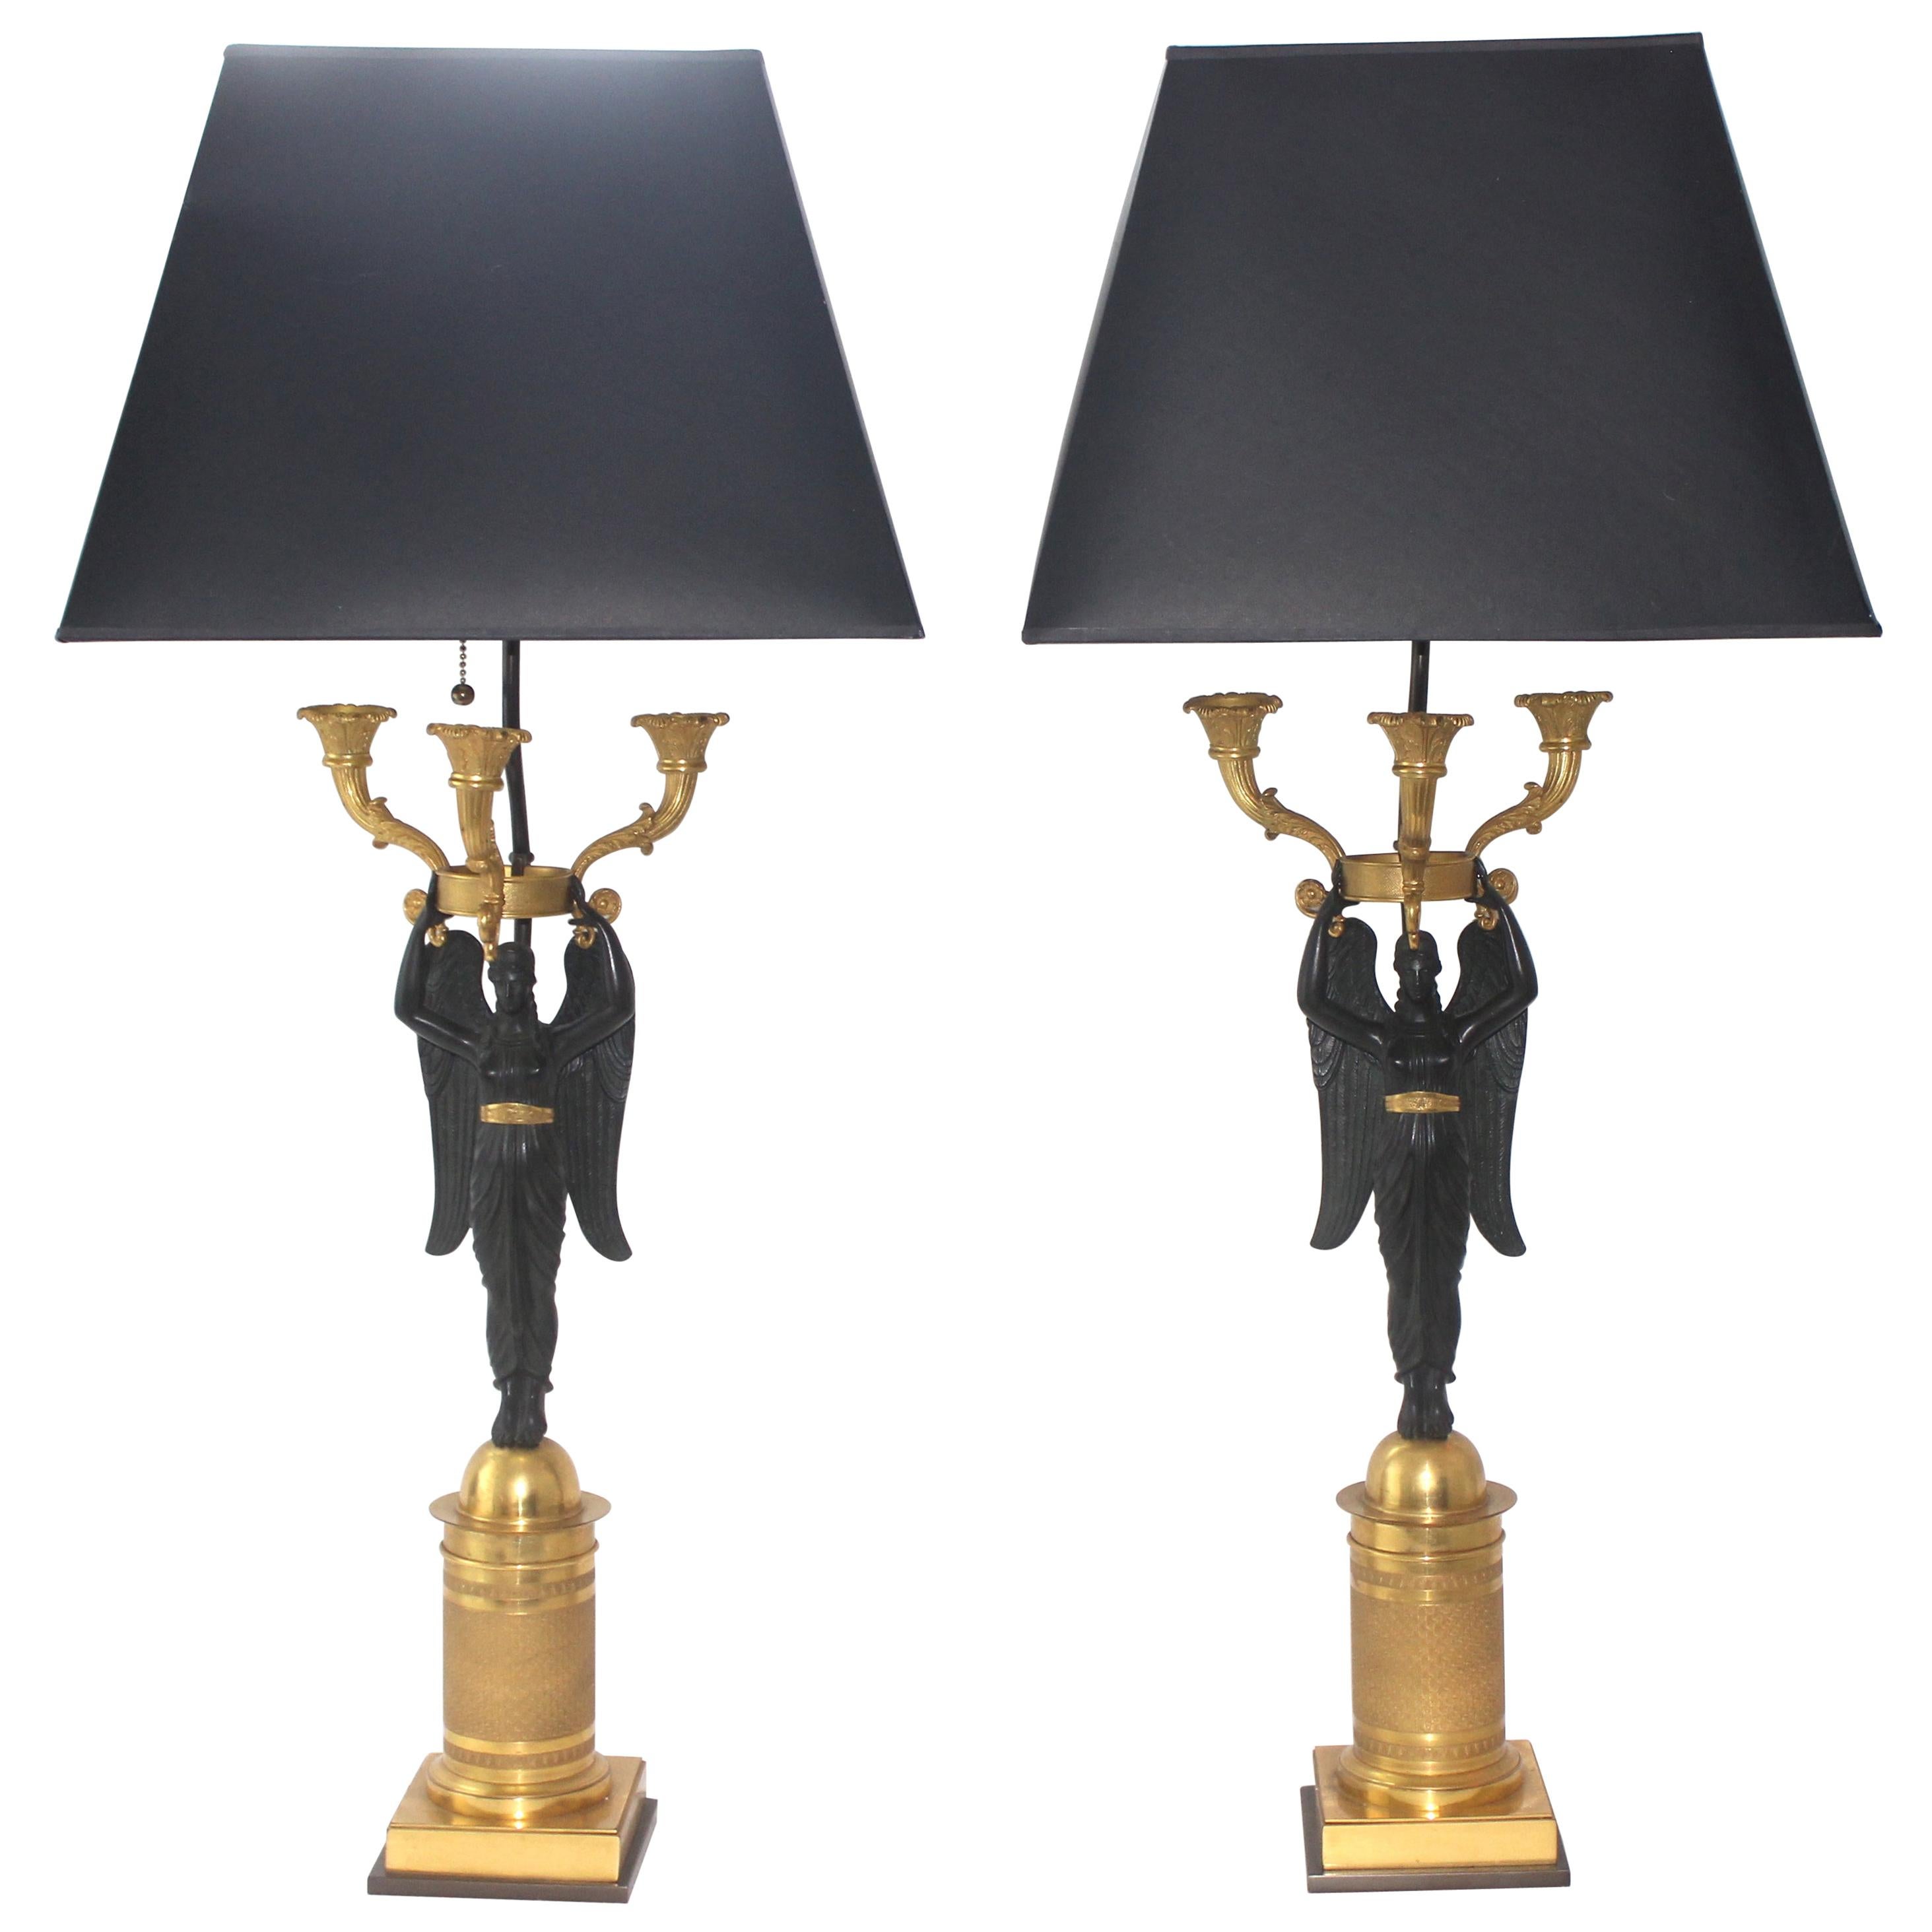 Pair of French Empire Bronze Candleabra Lamps